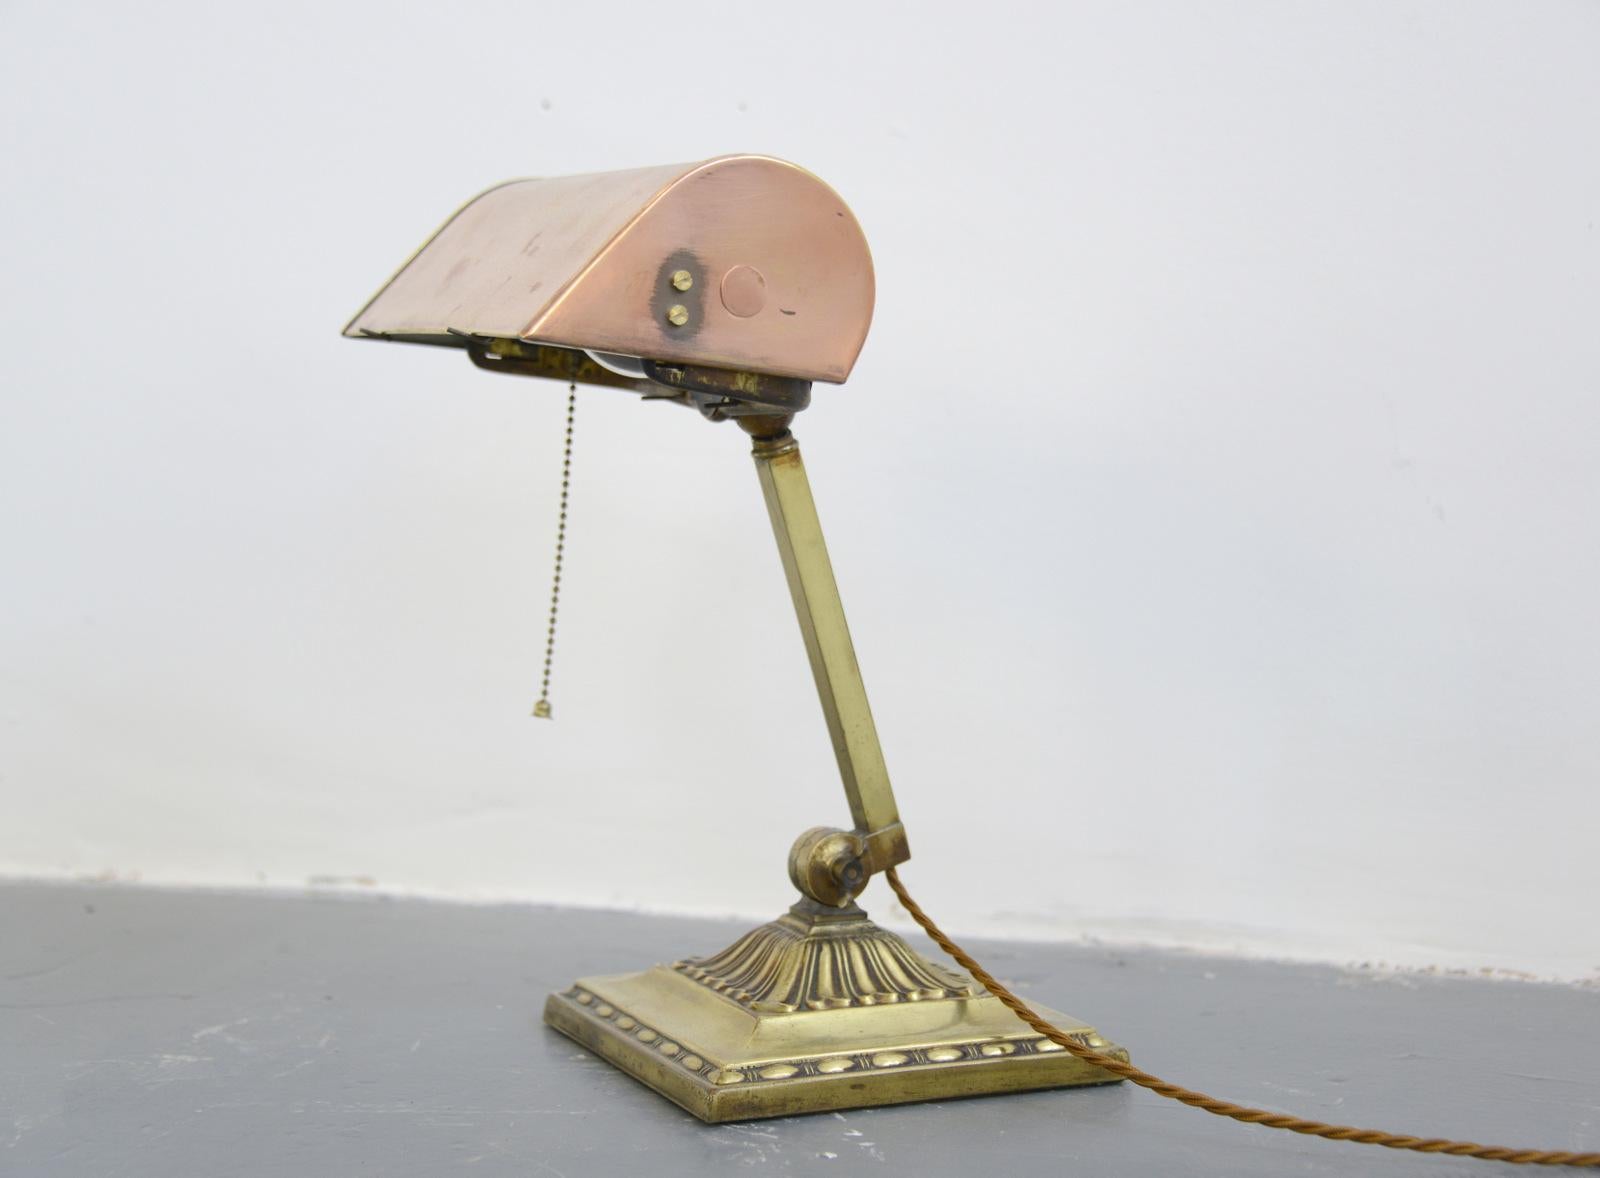 Emeralite NY desk lamp, circa 1910

- Copper shade
- Adjustable brass arm
- Original bulb holder
- Ornate base
- Made by HD McFaddin & Co., NY
- American, 1910
- Measures: 35 cm tall x 17 cm deep x 17 cm wide

Condition report:

Fully re